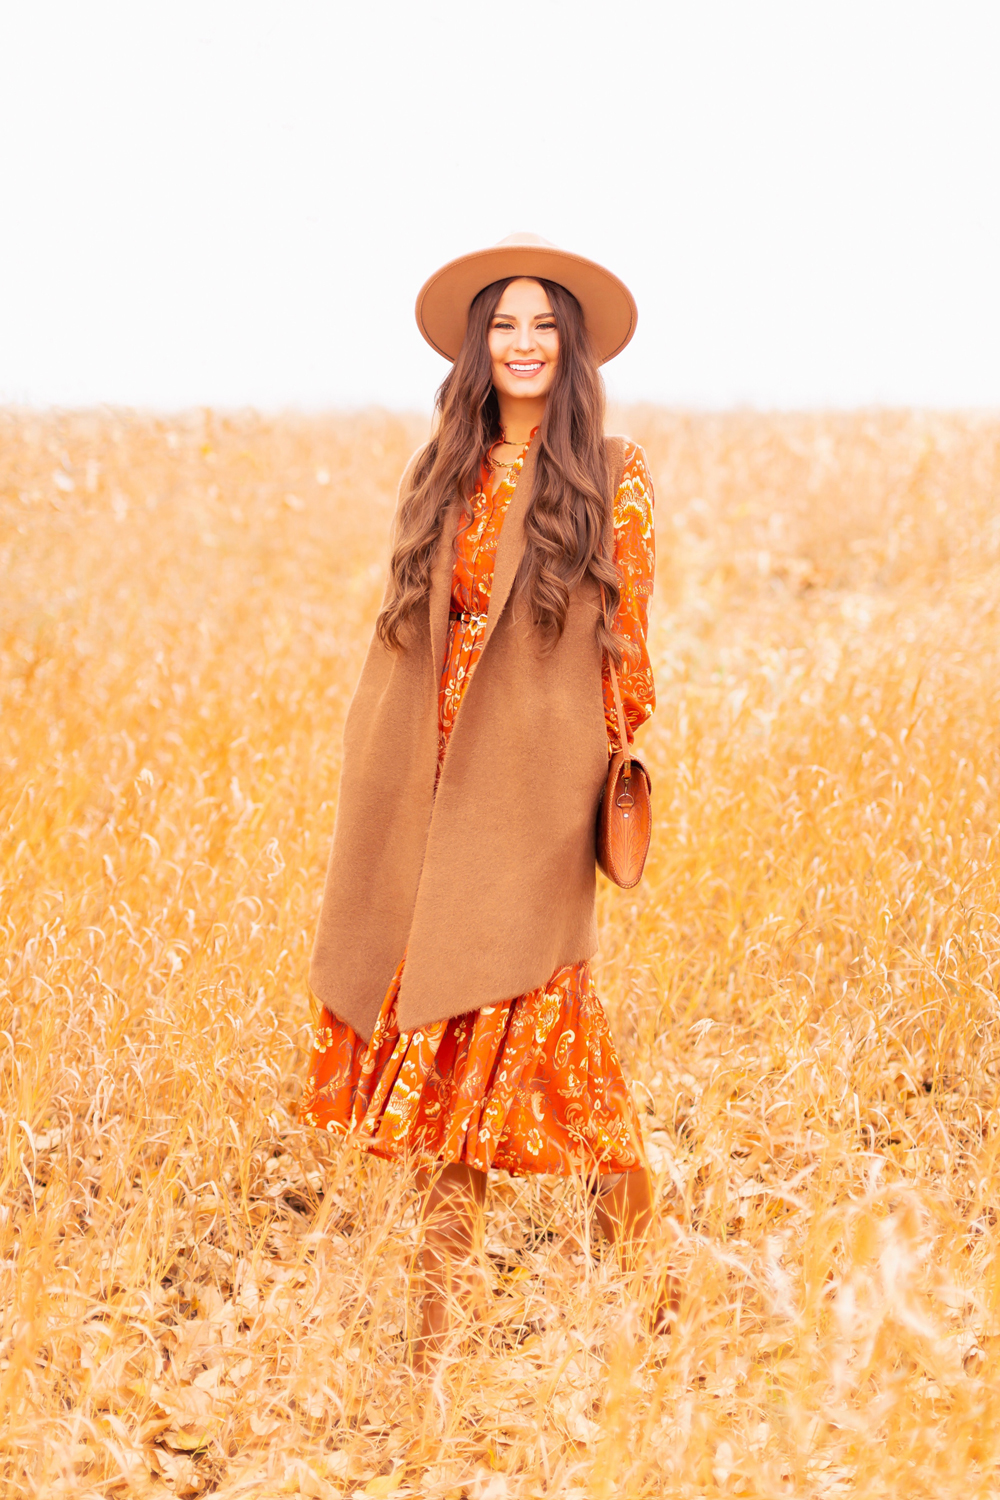 6 Luxe Bohemian Fall Outfits | Thanksgiving Chic | Smiling brunette woman wearing an orange paisley midi dress, brown Pink Martini Stockport Vest, a slim cognac leather corset, a vintage leather hand tooled bag and a camel flat brimmed rancher hat amongst golden grasses | Boho Fall 2022 Outfit Ideas | Classic Fall Outfit Formulas | Feminine Bohemian Style | Polished Bohemian Style | Elegant Bohemian Style | Bohemian Outfit Ideas | Calgary Alberta Fashion Blogger // JustineCelina.com